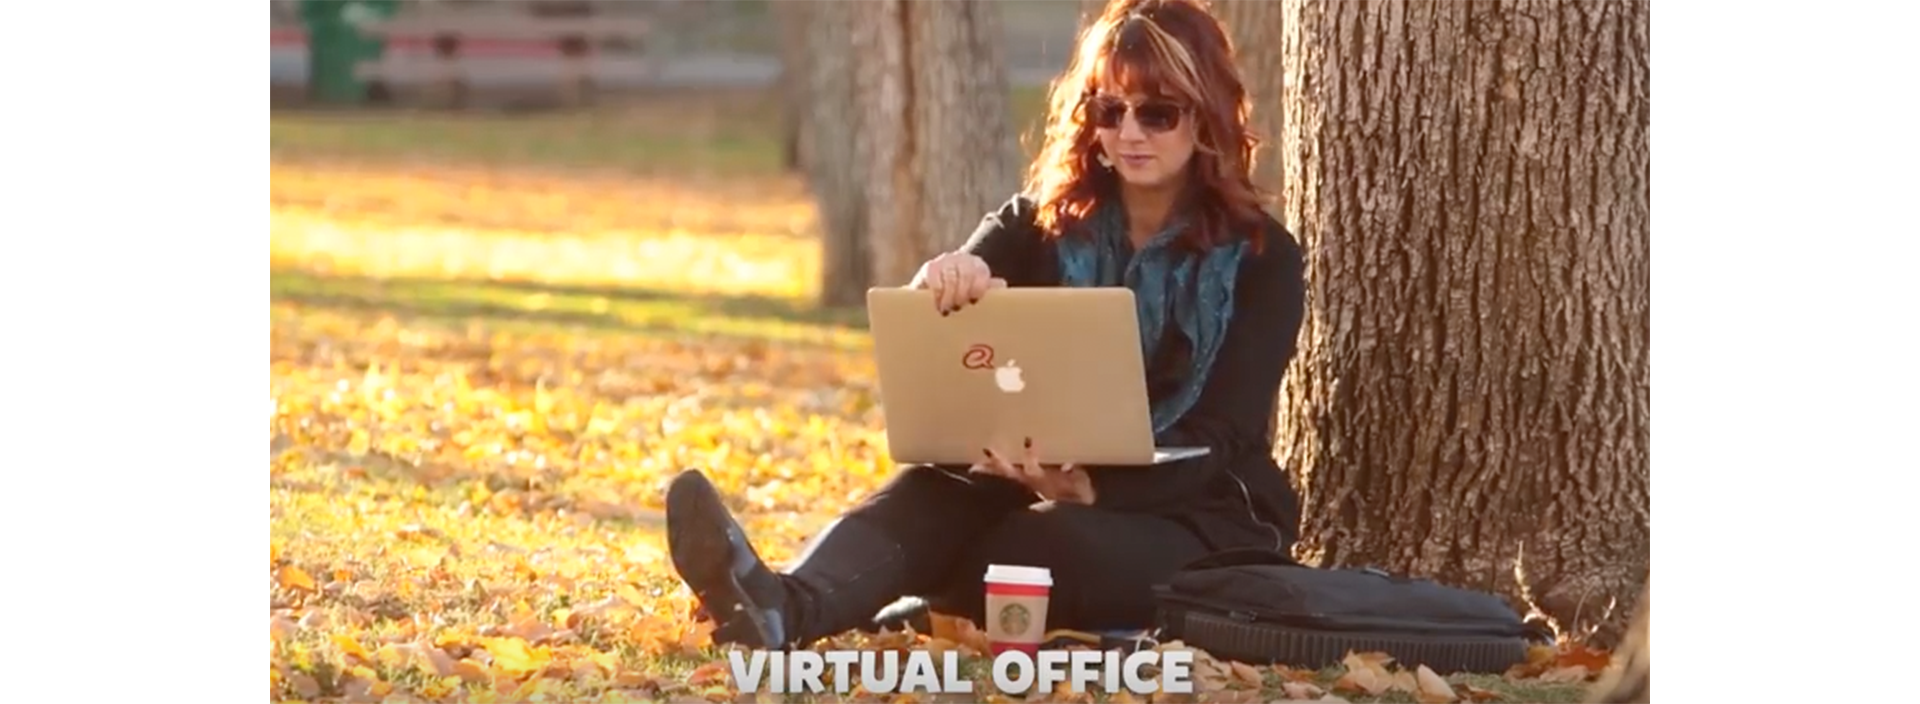 How is the virtual workplace different from a traditional office?